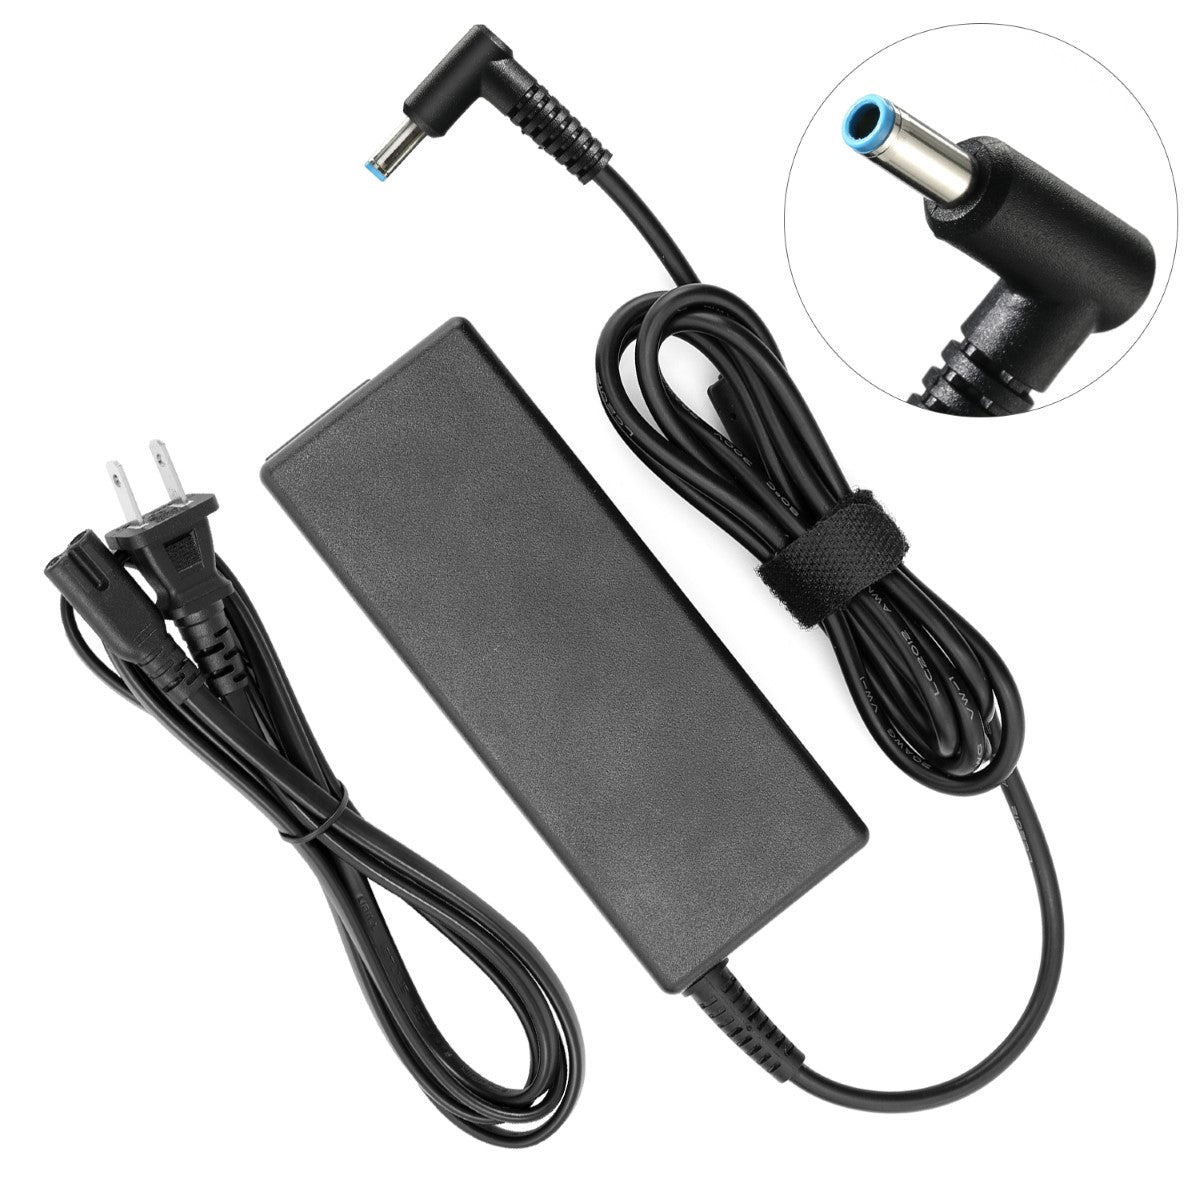 AC Adapter Charger for HP Chromebook 11-2110nr Notebook.